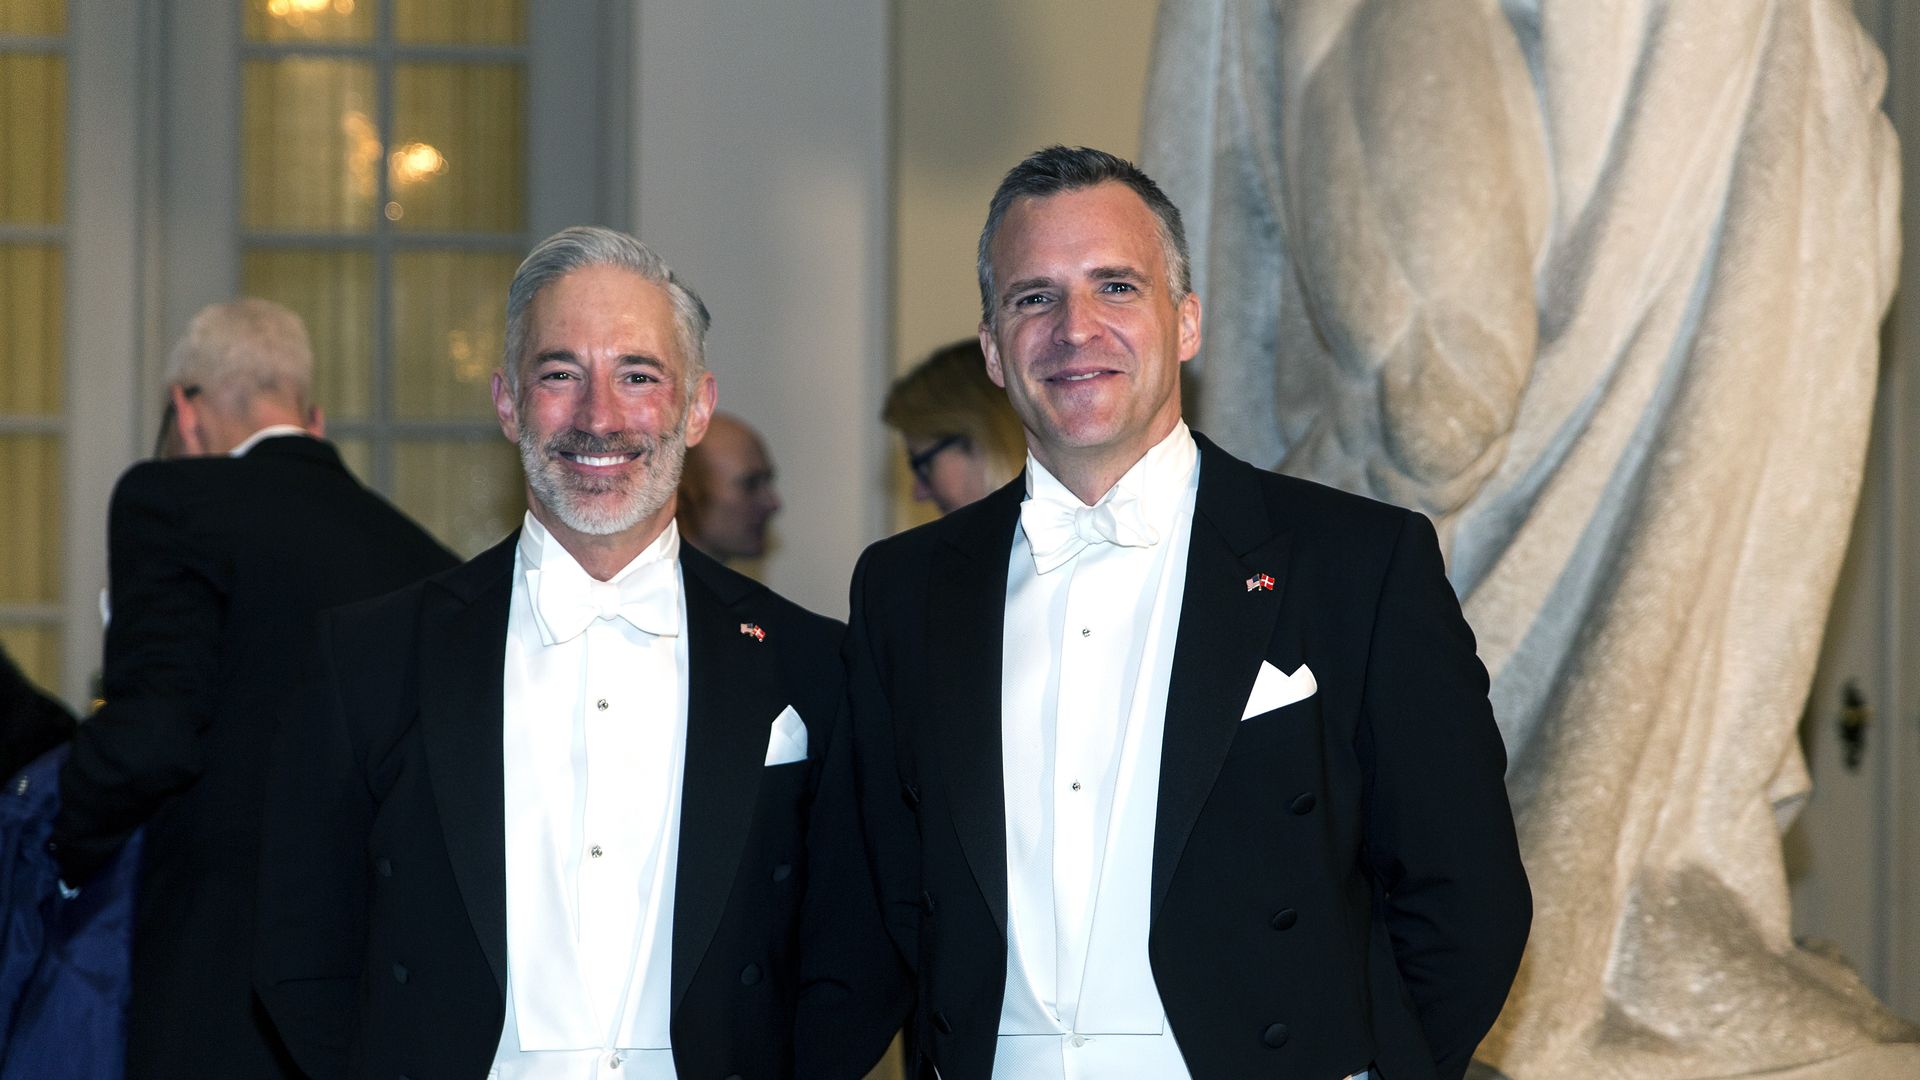  Rufus Gifford (R), US ambassador to Denmark, and spouse Dr. Stephen Devincent arrive to Queen Margrethe